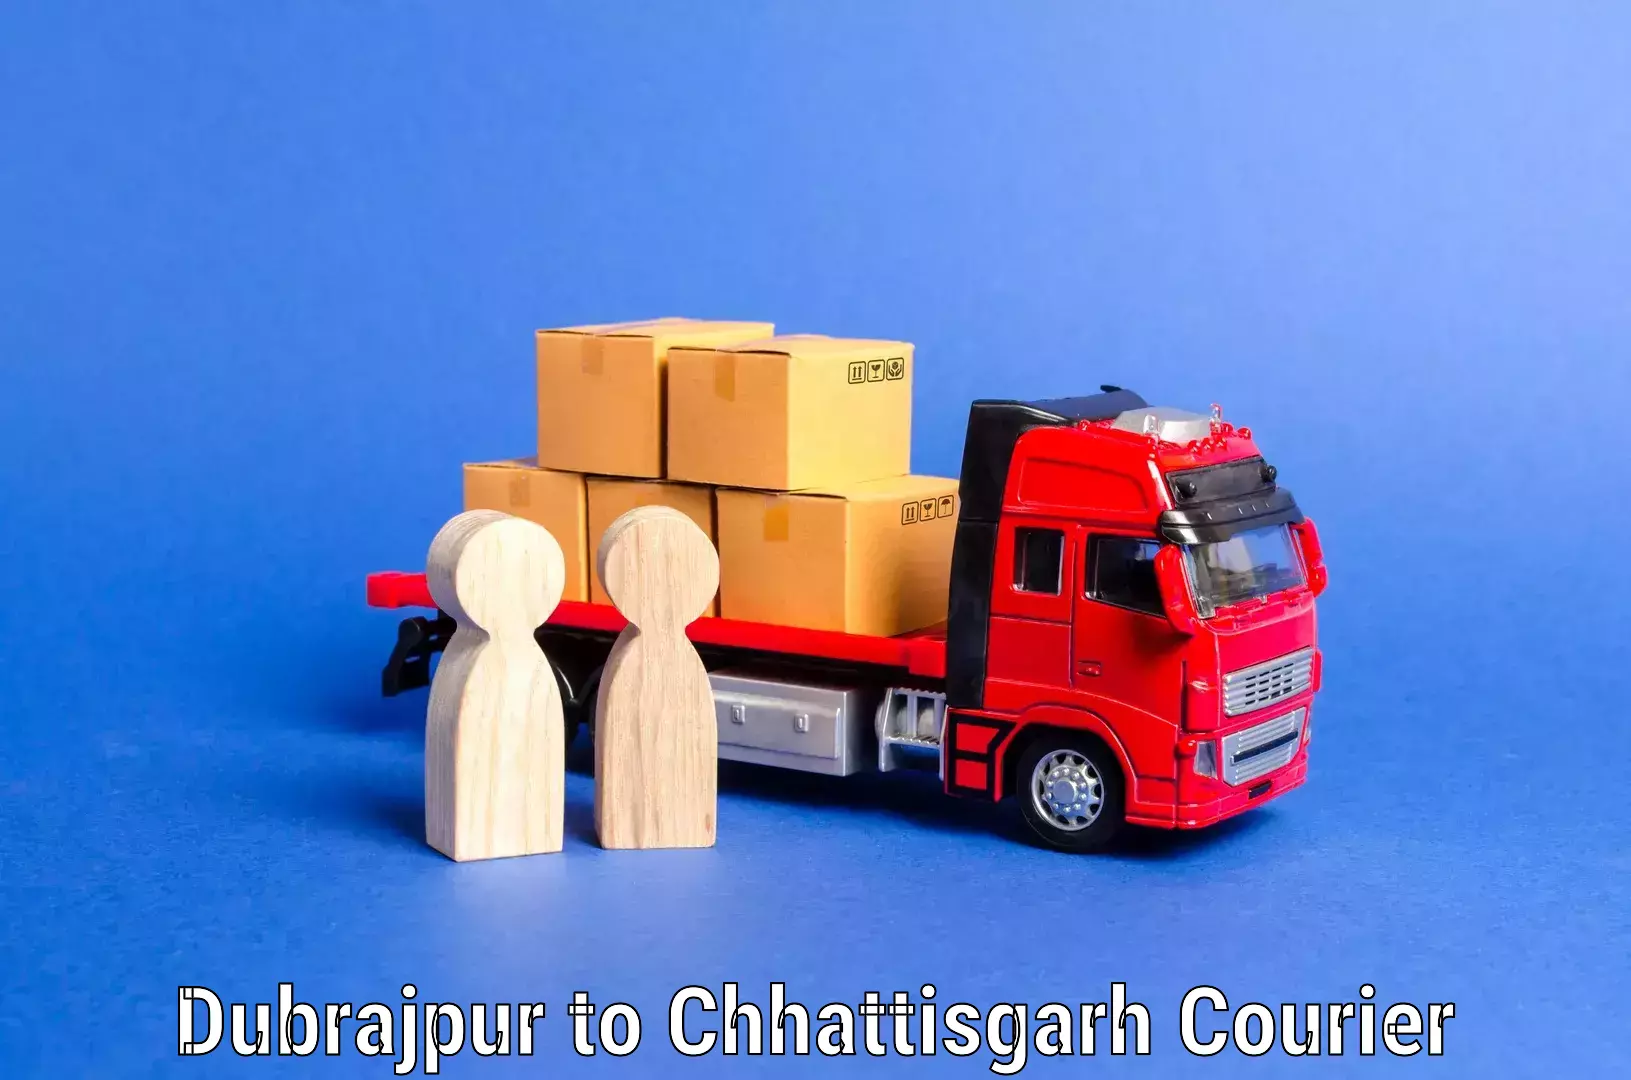 Home moving specialists Dubrajpur to Chhattisgarh